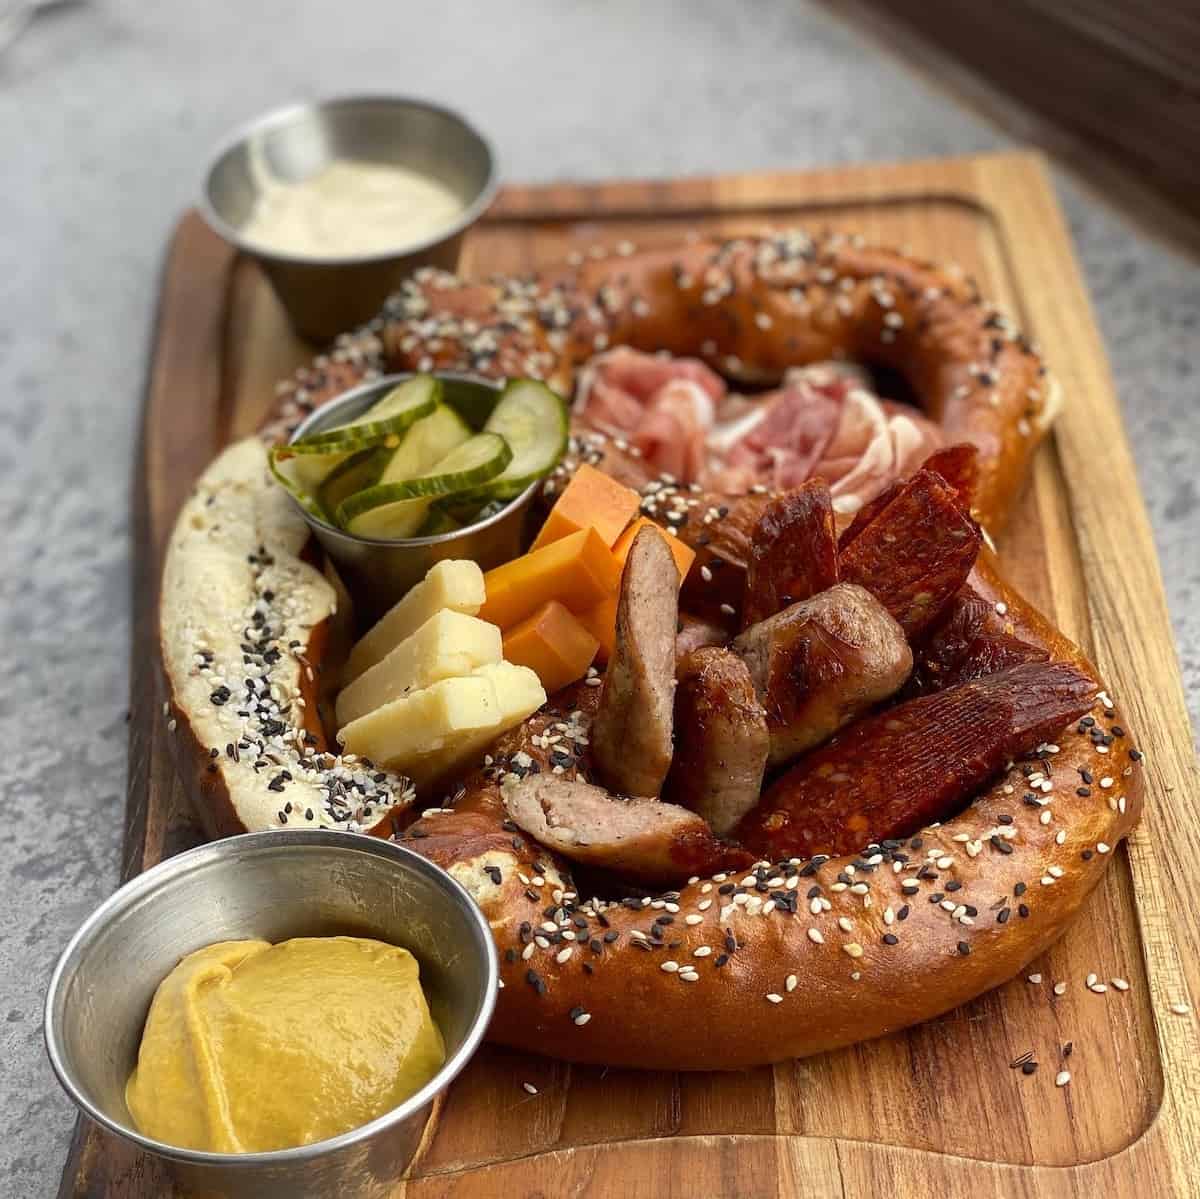 Pretzel with sausage, cheese, prosciutto, and pickles.